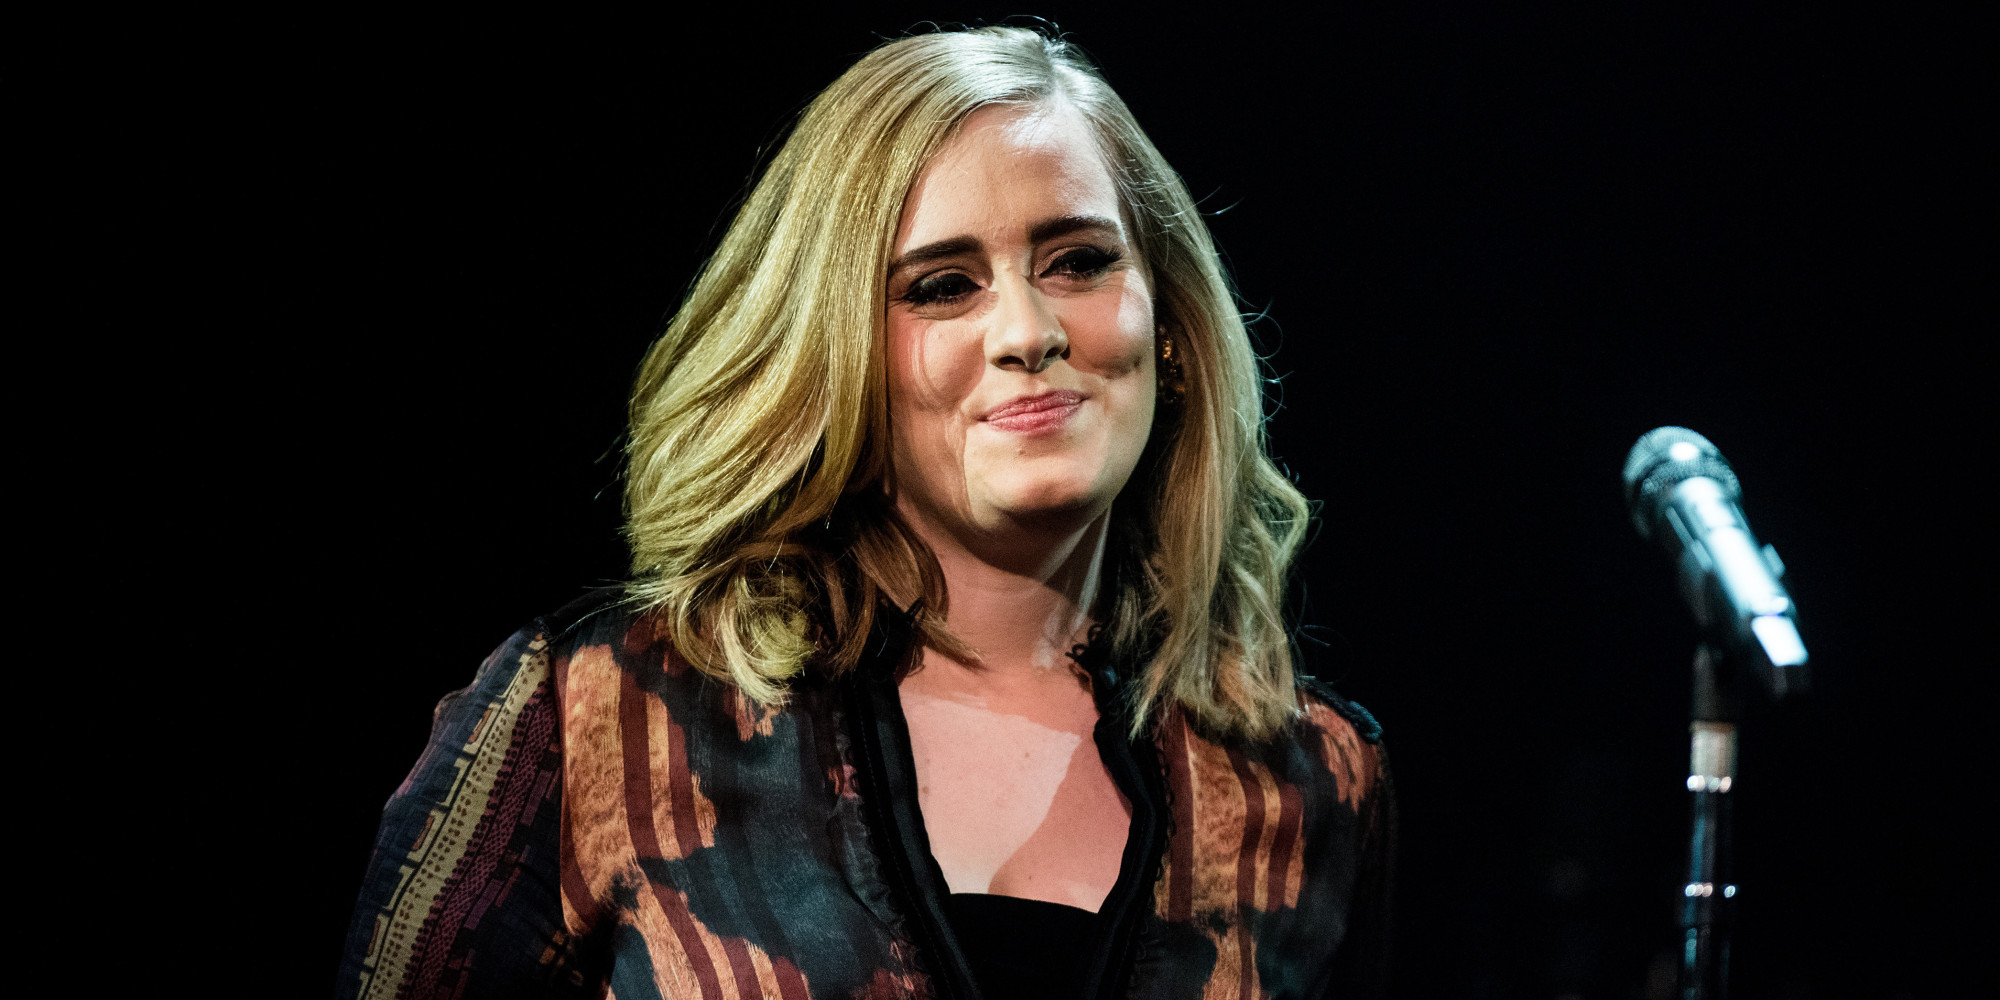 Adele Reveals New Short Hair Cut During X Factor Performance